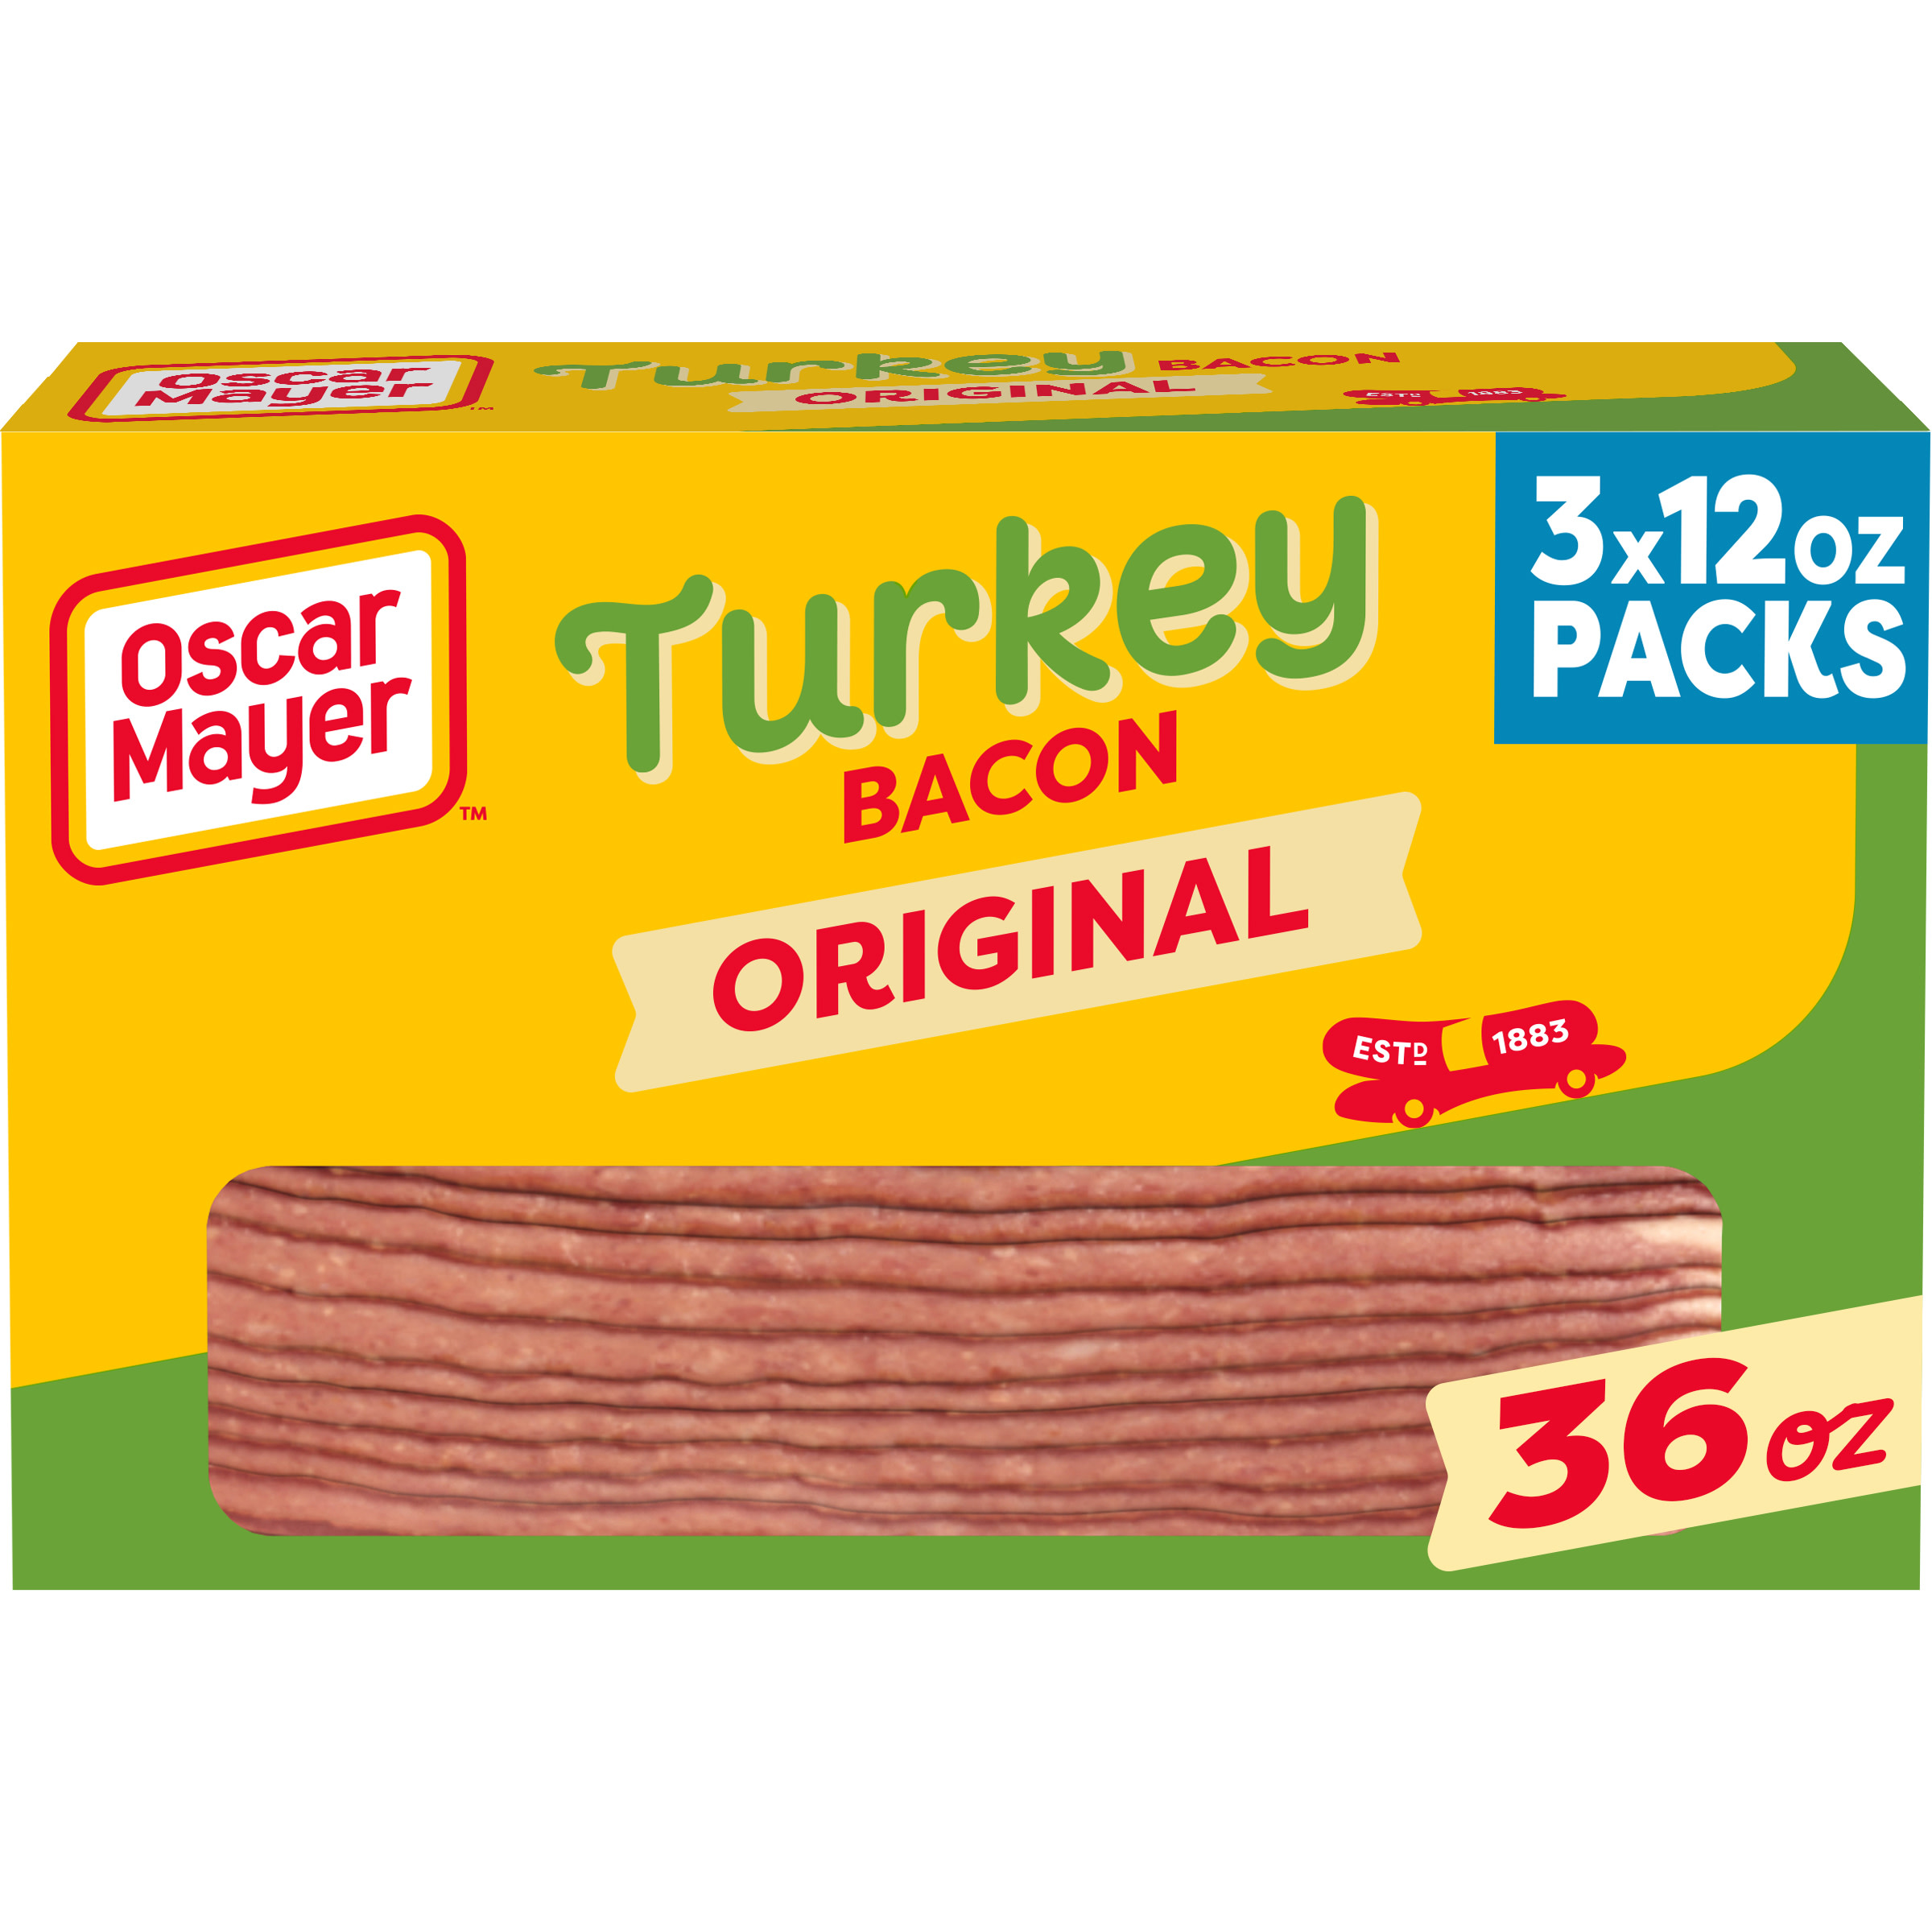 Oscar Mayer Fully Cooked & Gluten Free Turkey Bacon with 62% Less Fat & 57% Less Sodium, 3 ct Box, 12 oz Packs, 53-55 total slices - image 1 of 15